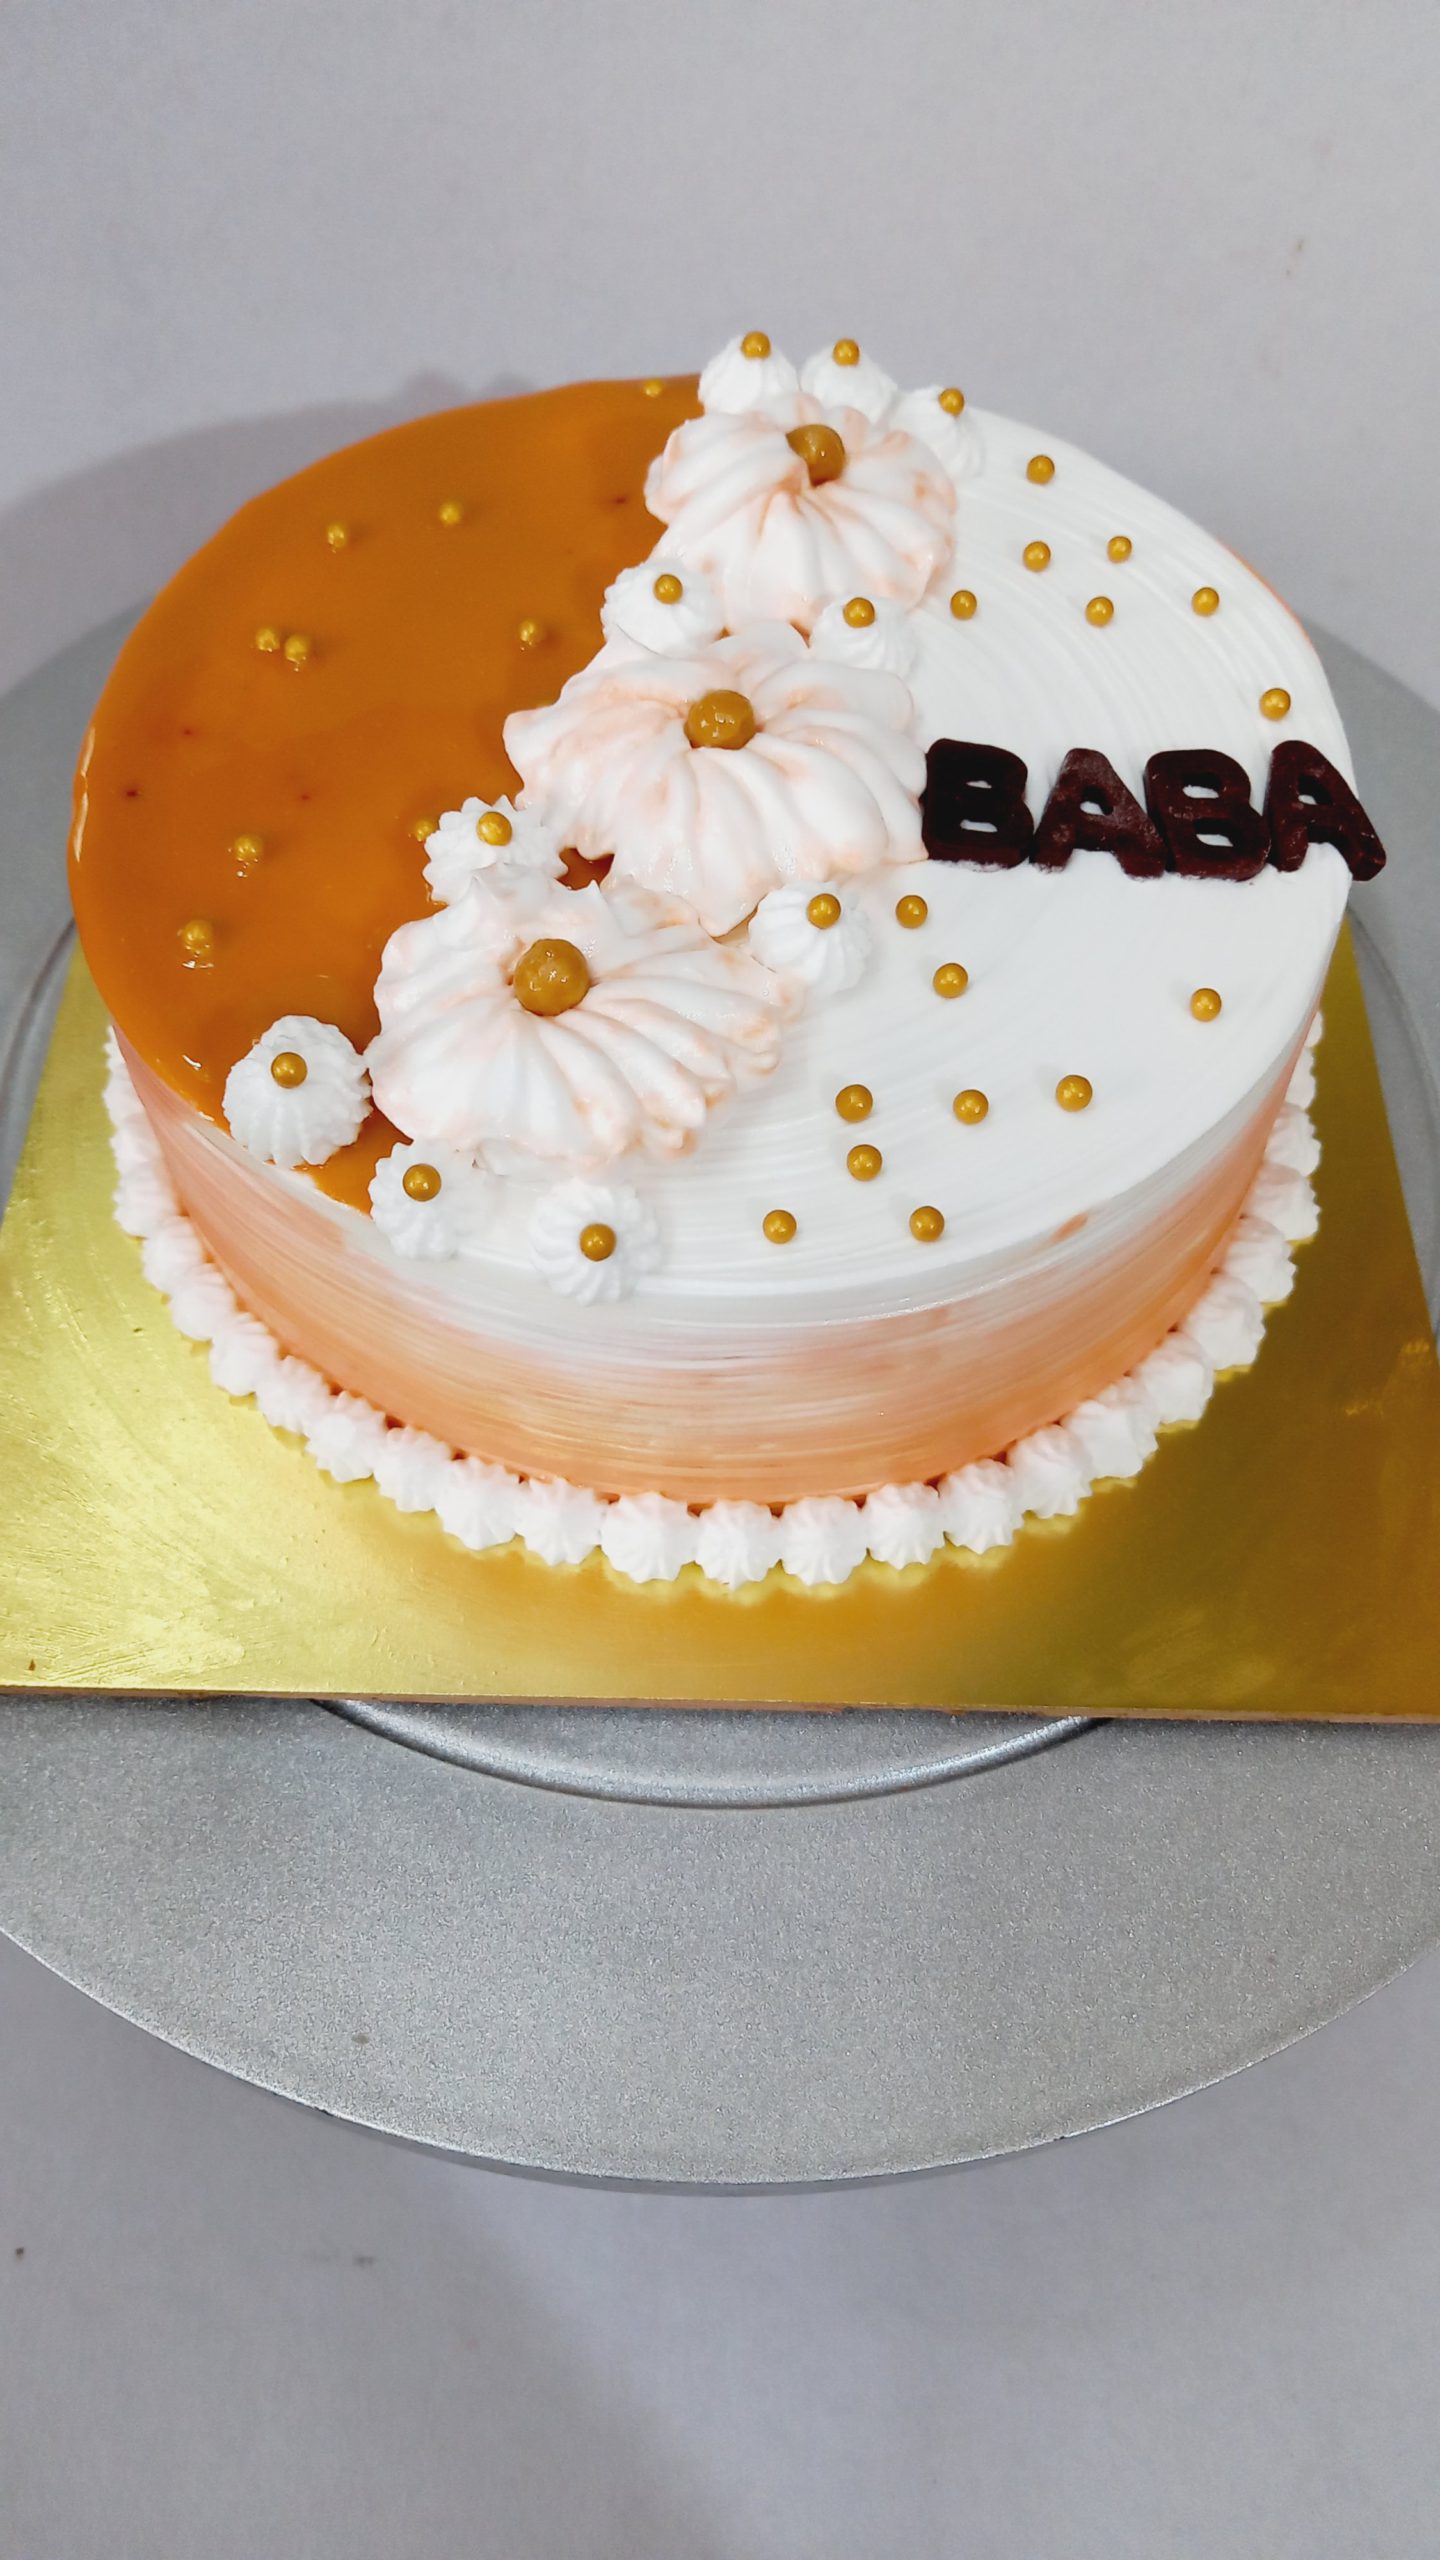 Butterscotch Flavor Cake Designs, Images, Price Near Me